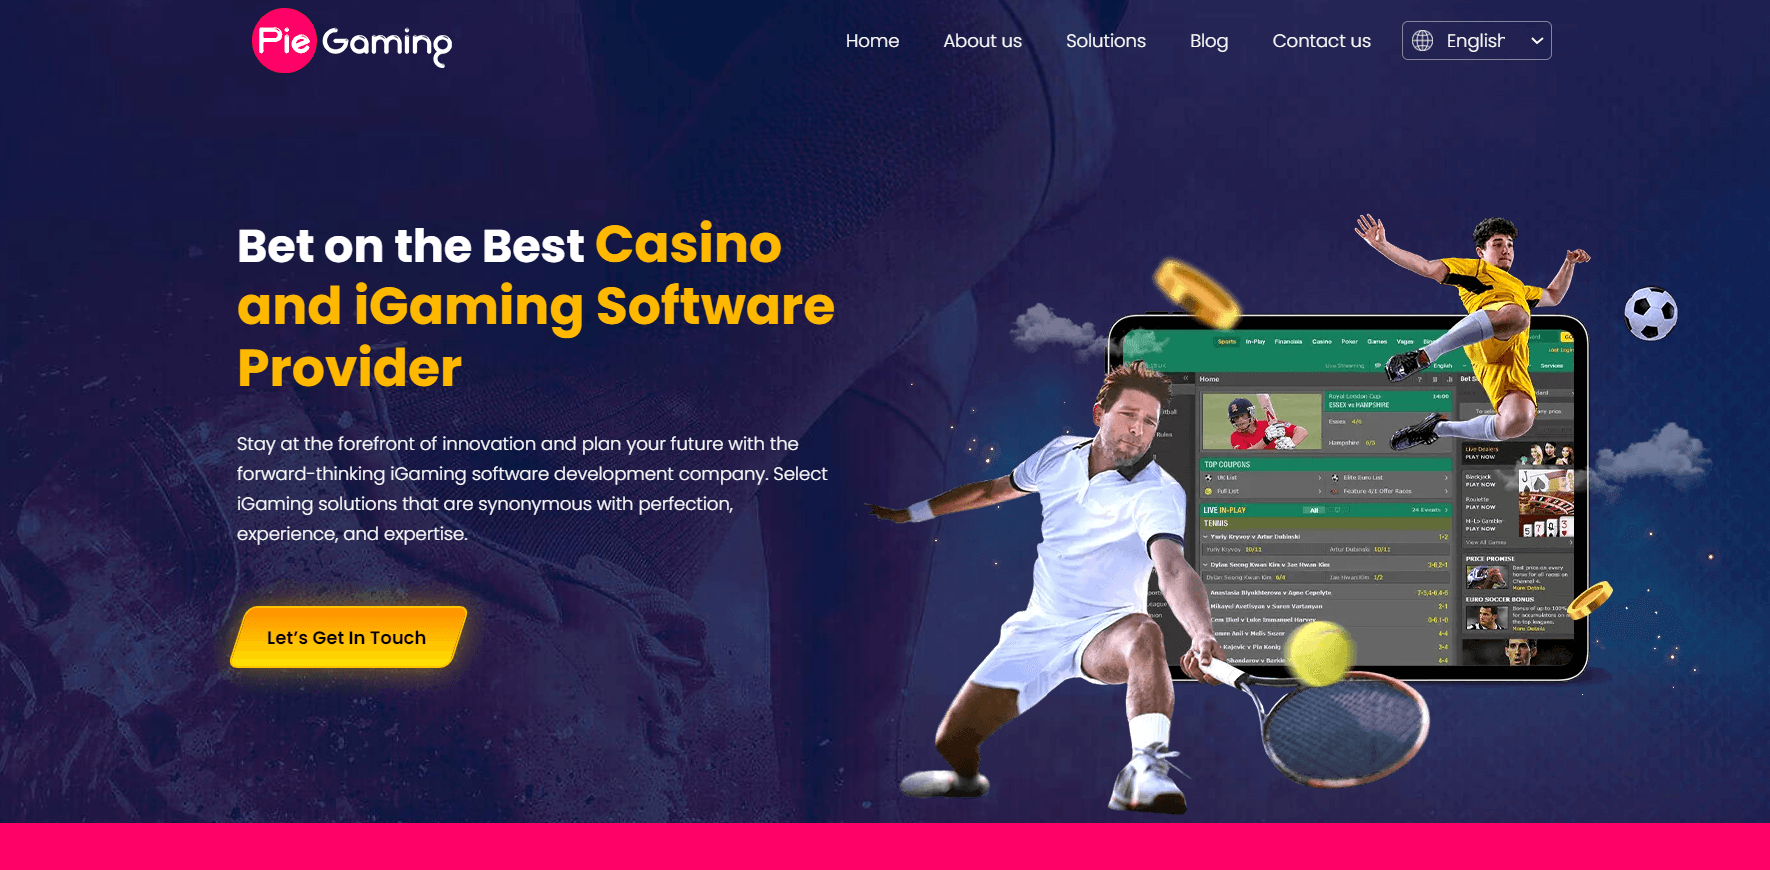 Piegaming-igaming software provider